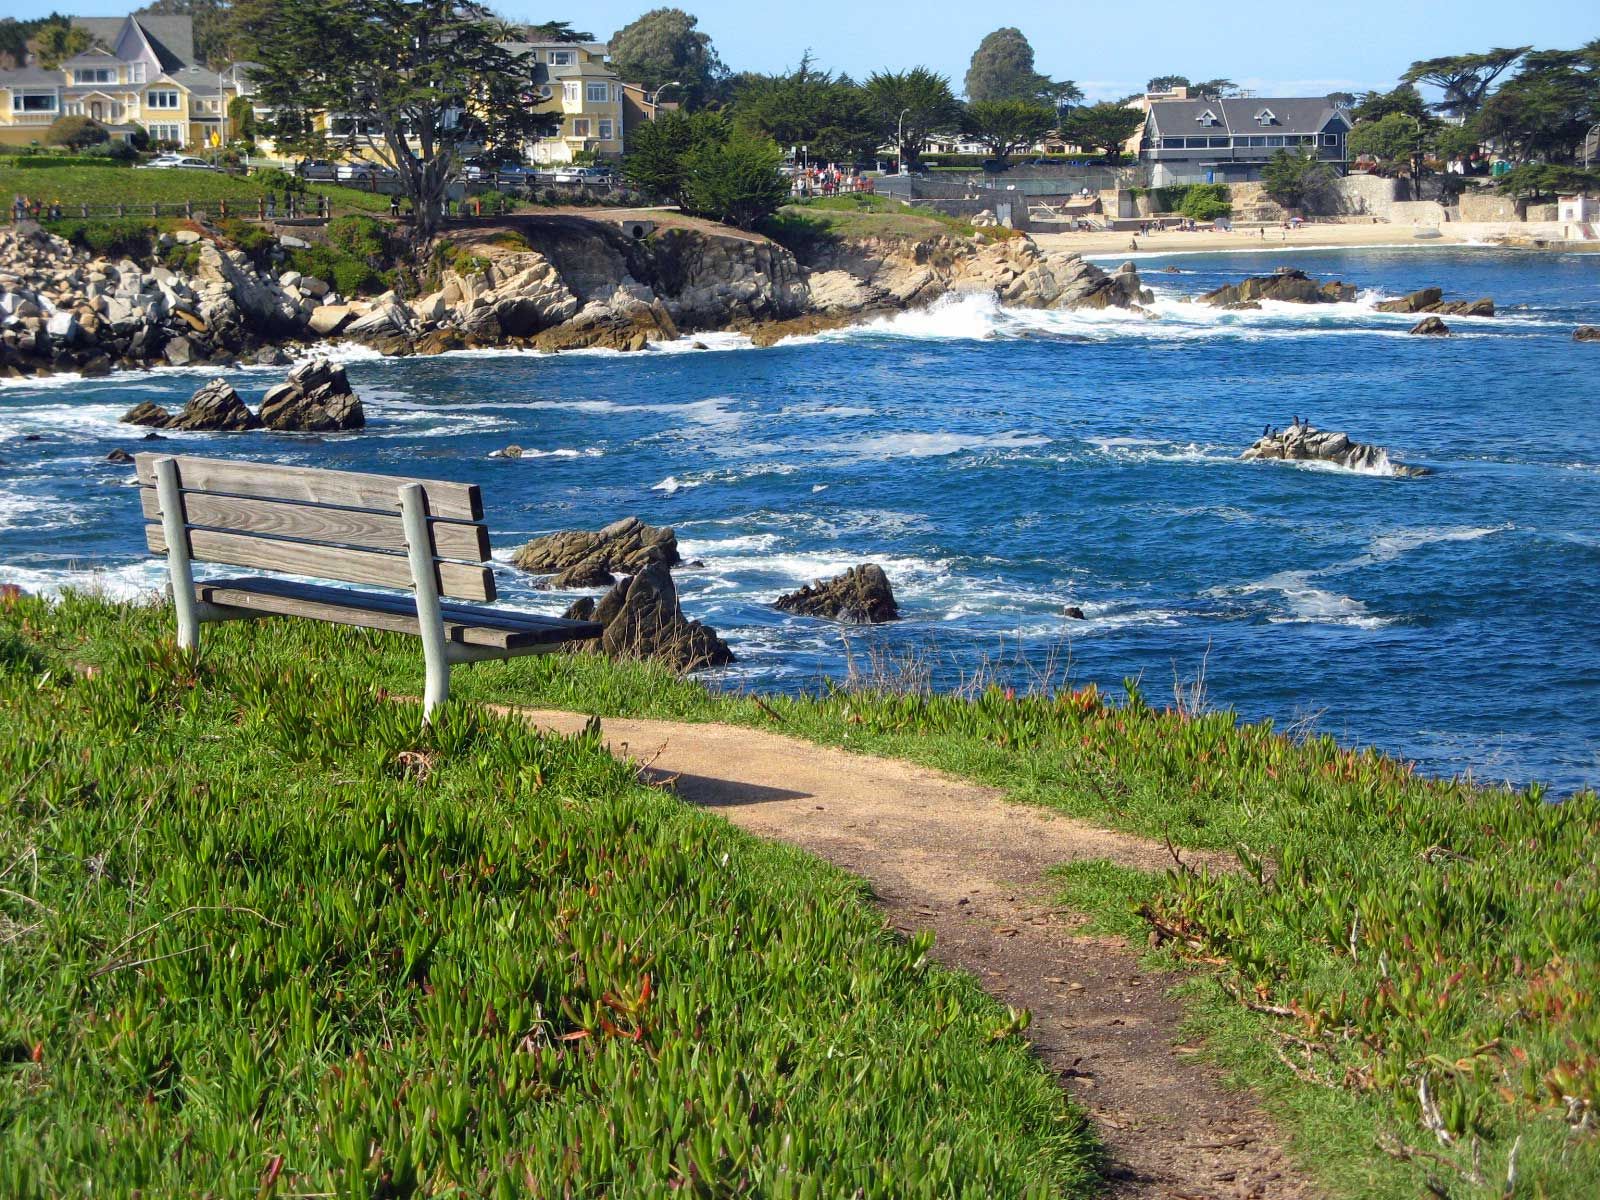 Monterey Bay, we will travel Hwy 1 down the coastline of California